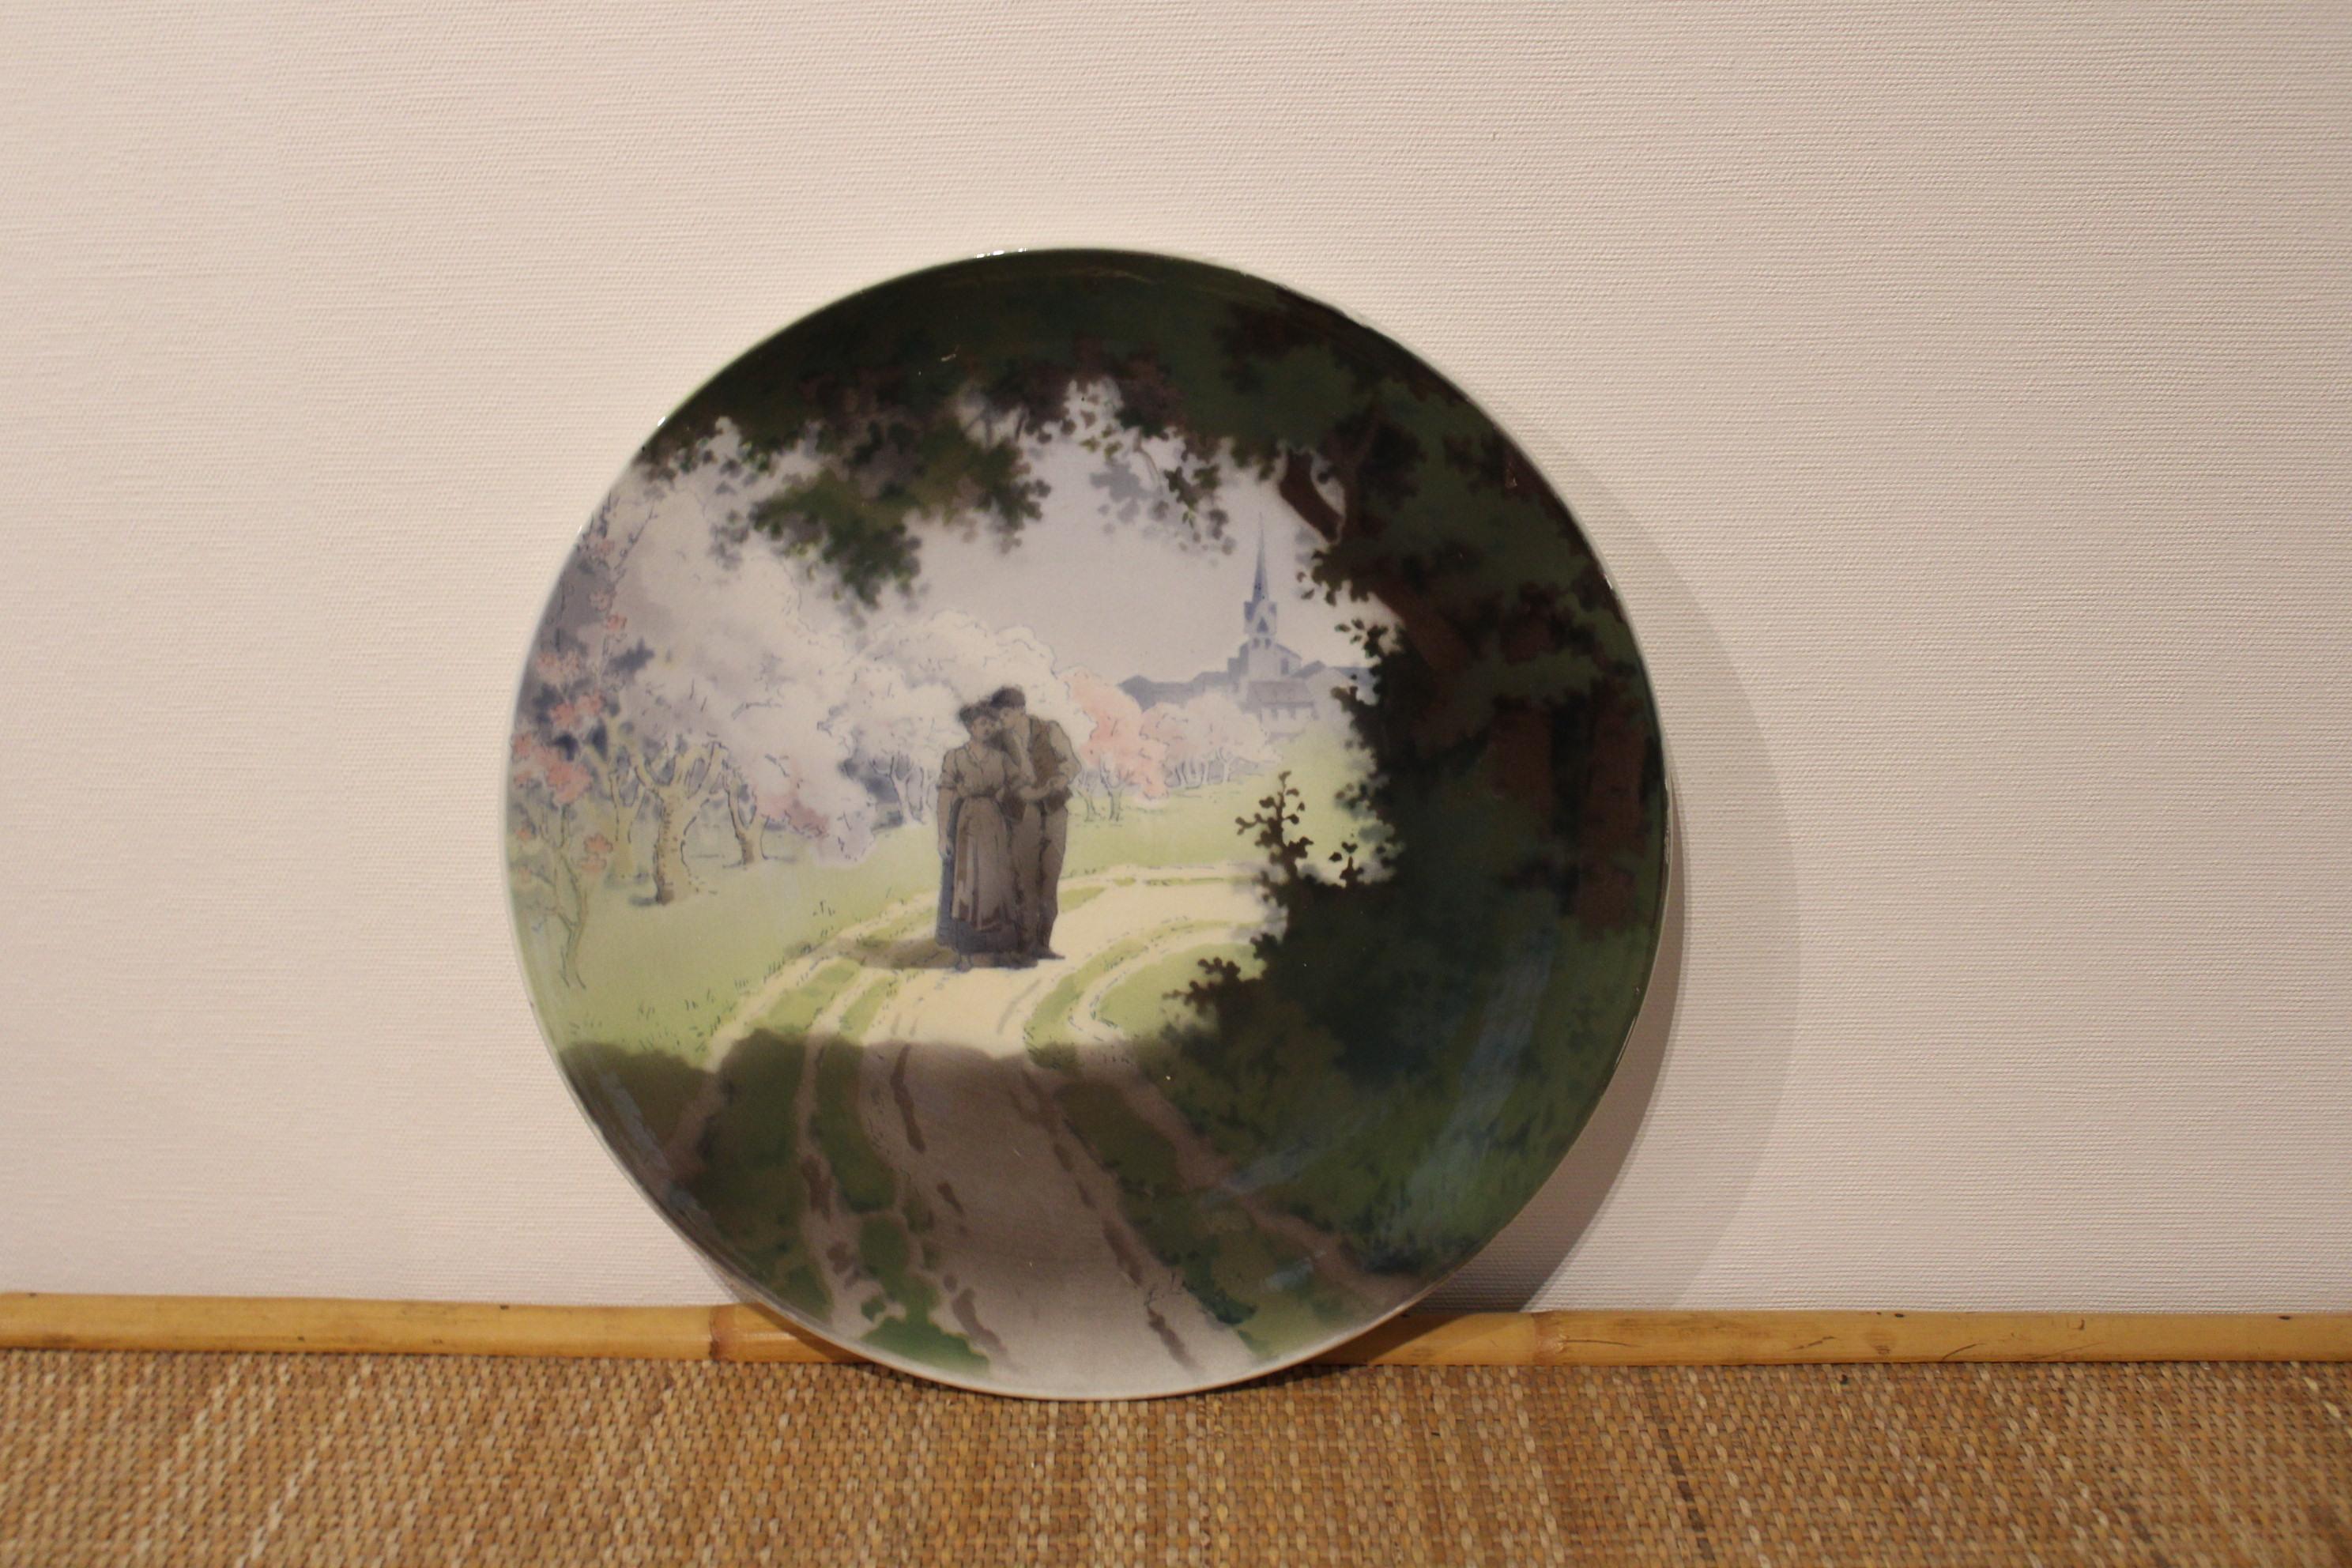 Painted ceramic plate
Bucolic decor, representing a couple
French work, early 20th century 